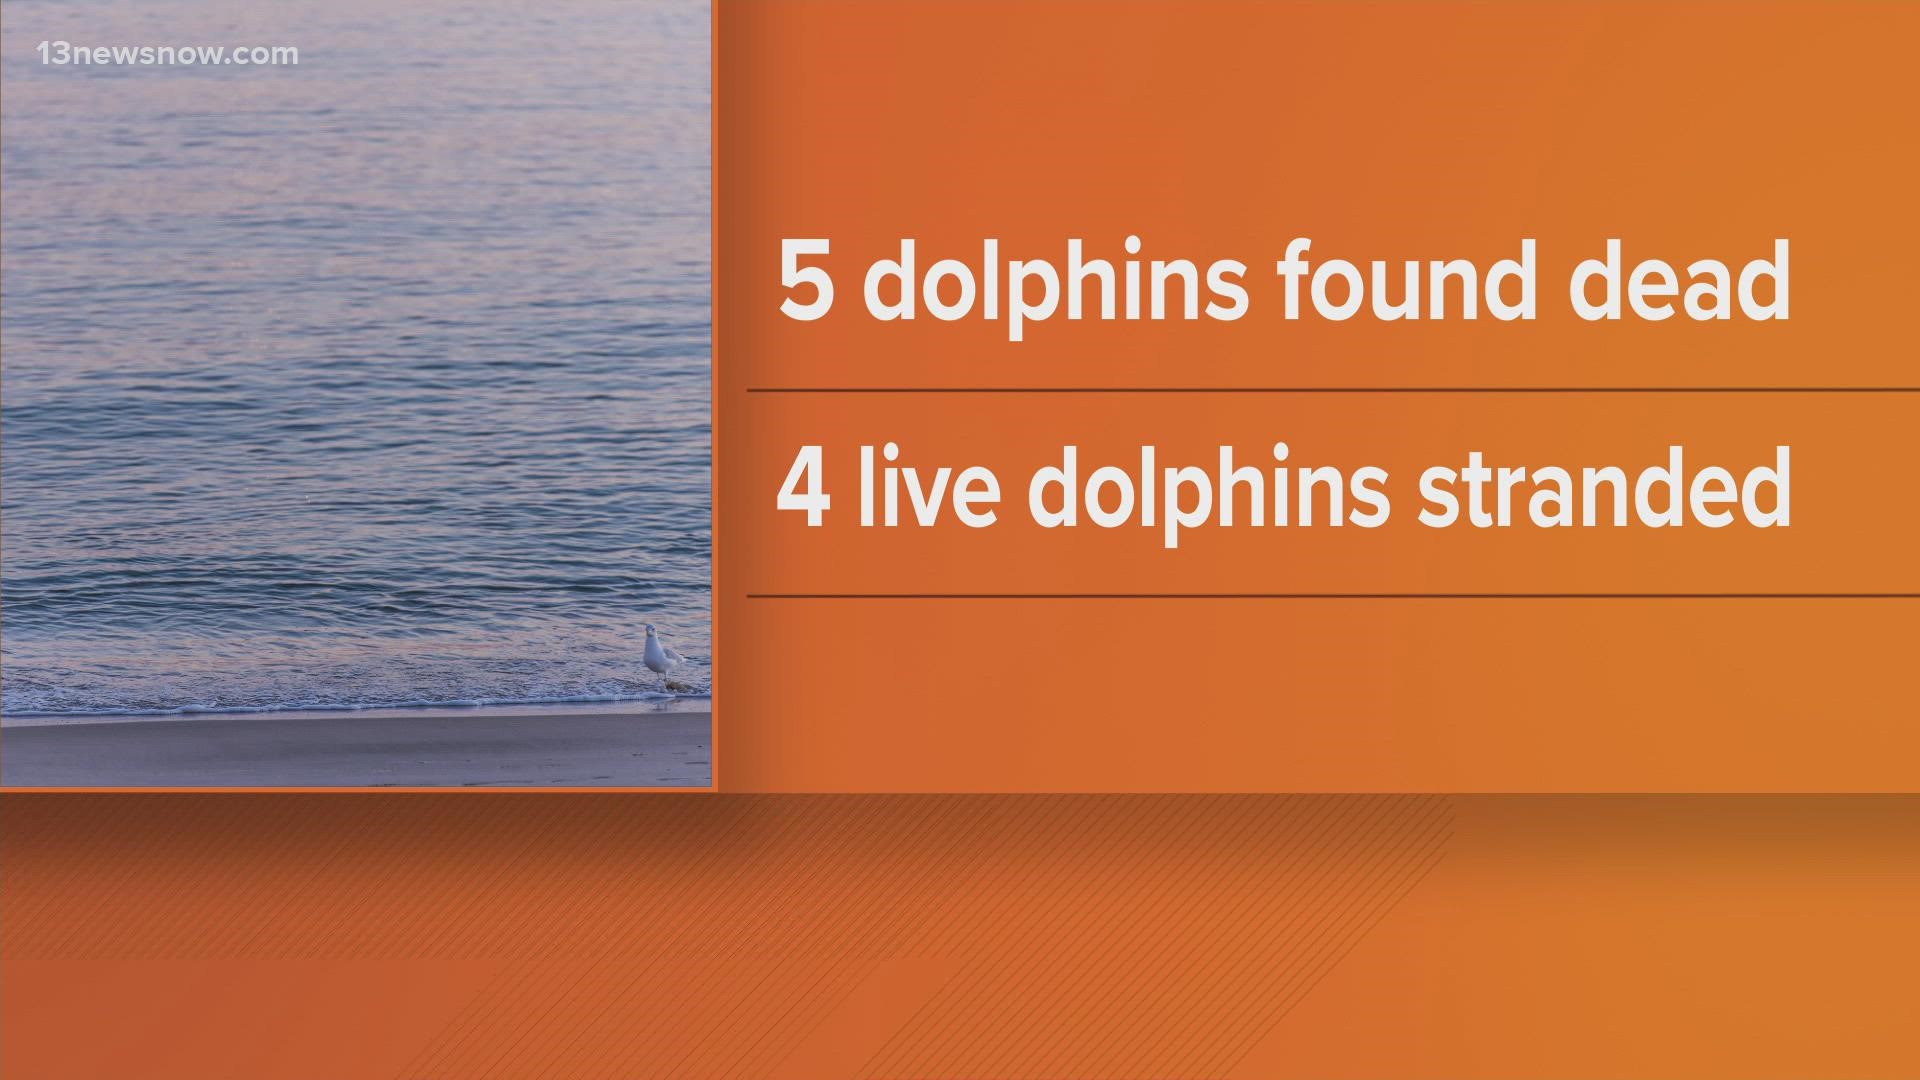 The Virginia Aquarium & Marine Science Center is investigating the deaths of five dolphins who were found in shallow waters along Virginia’s coast.